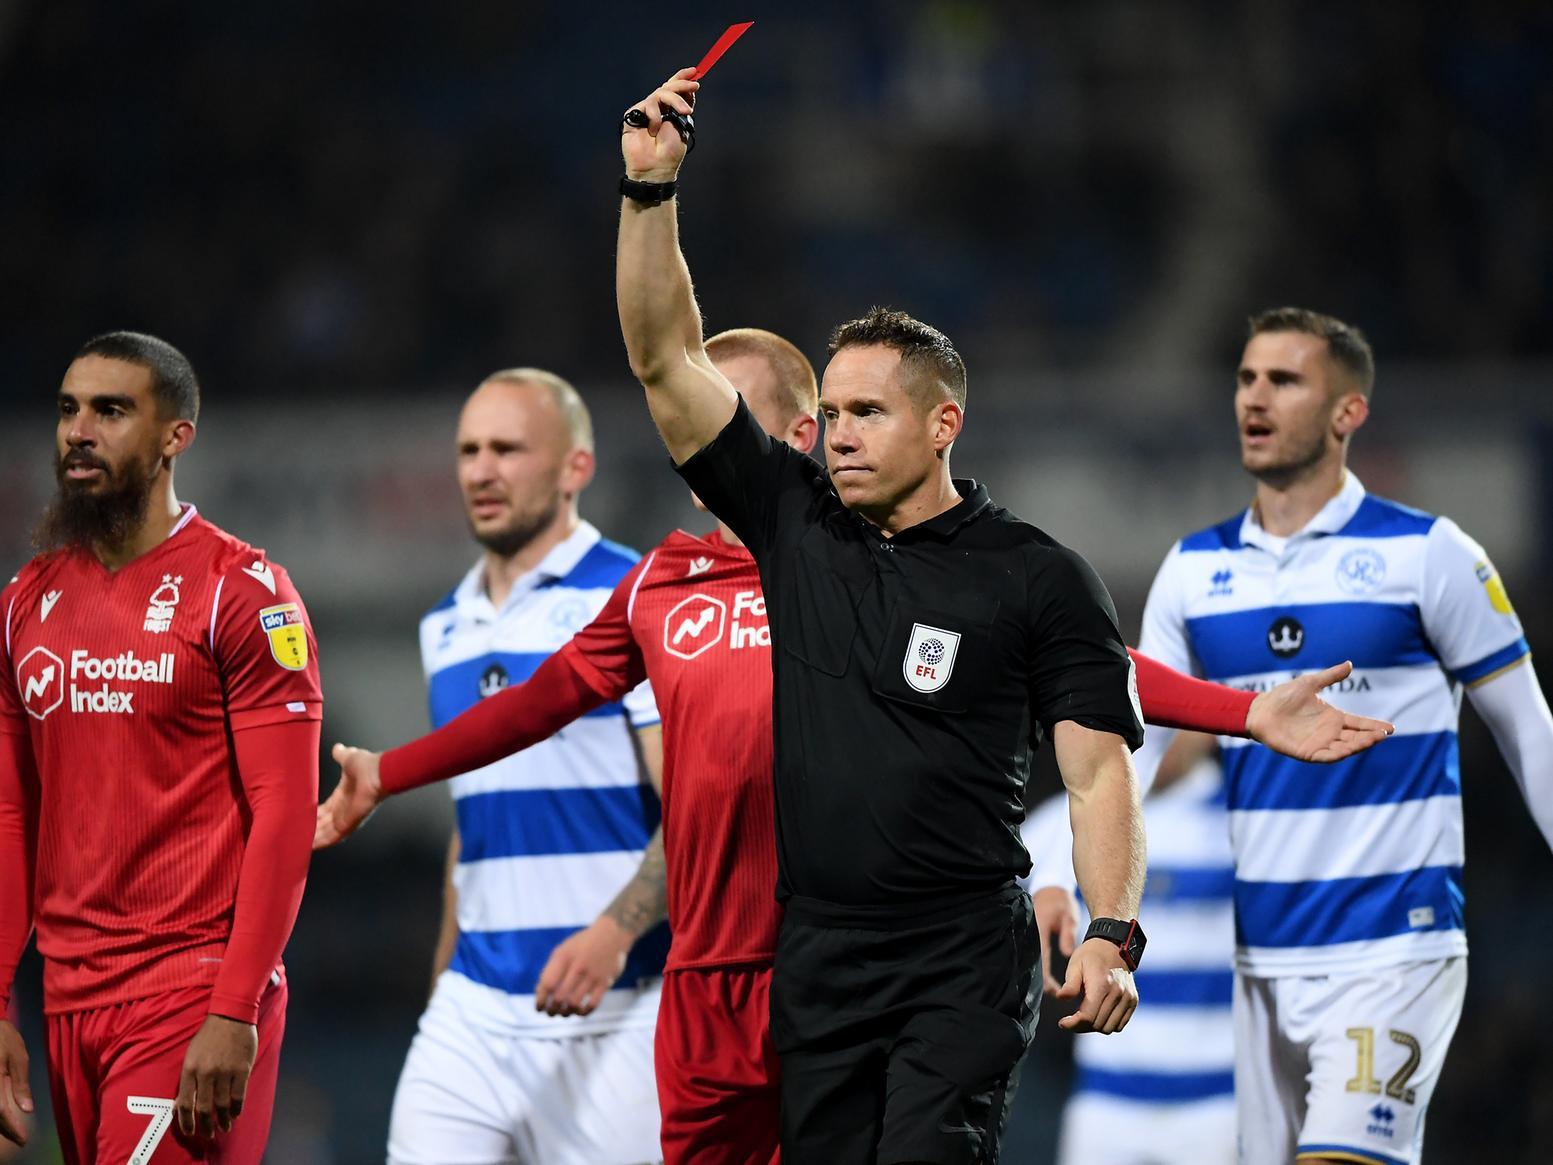 These are dark, dark times for the Hoops. After Lee Wallace was sent off in the second half - a decision which enraged his manager - Nottingham Forest went to town, and ran out 4-0 winners at Loftus Road.